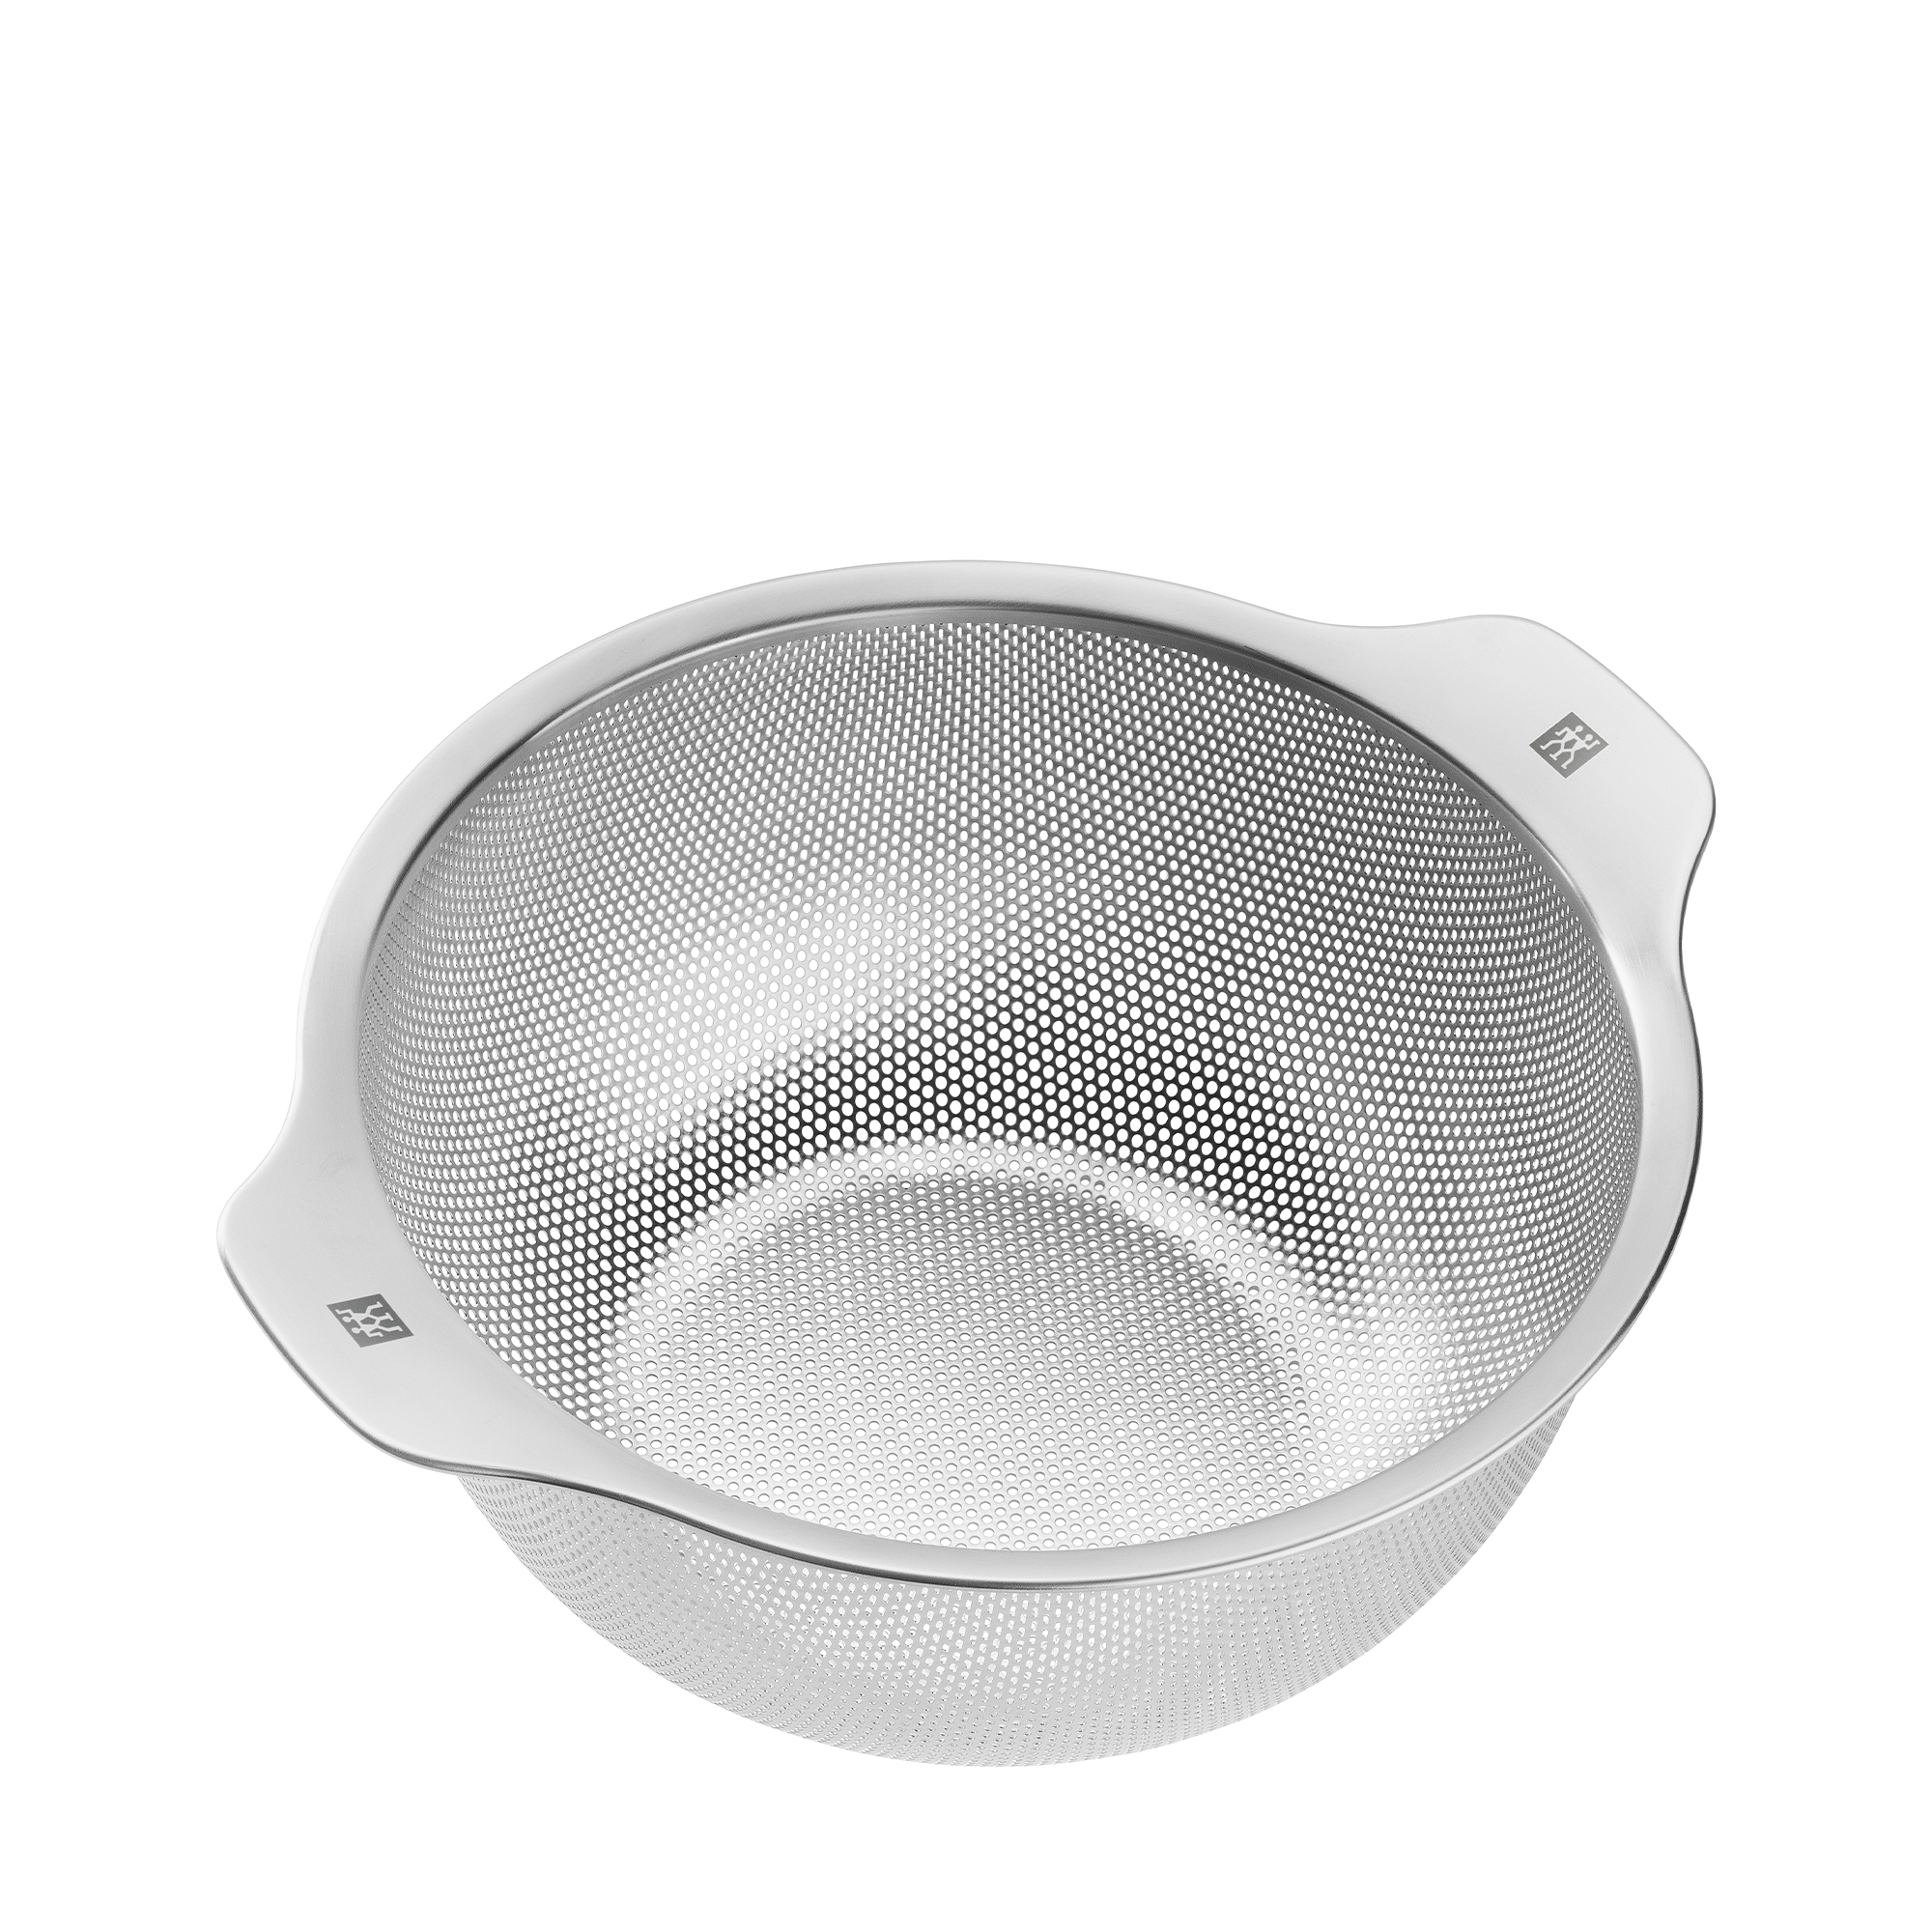 Zwilling - Sieve 18/10 stainless steel 24 cm